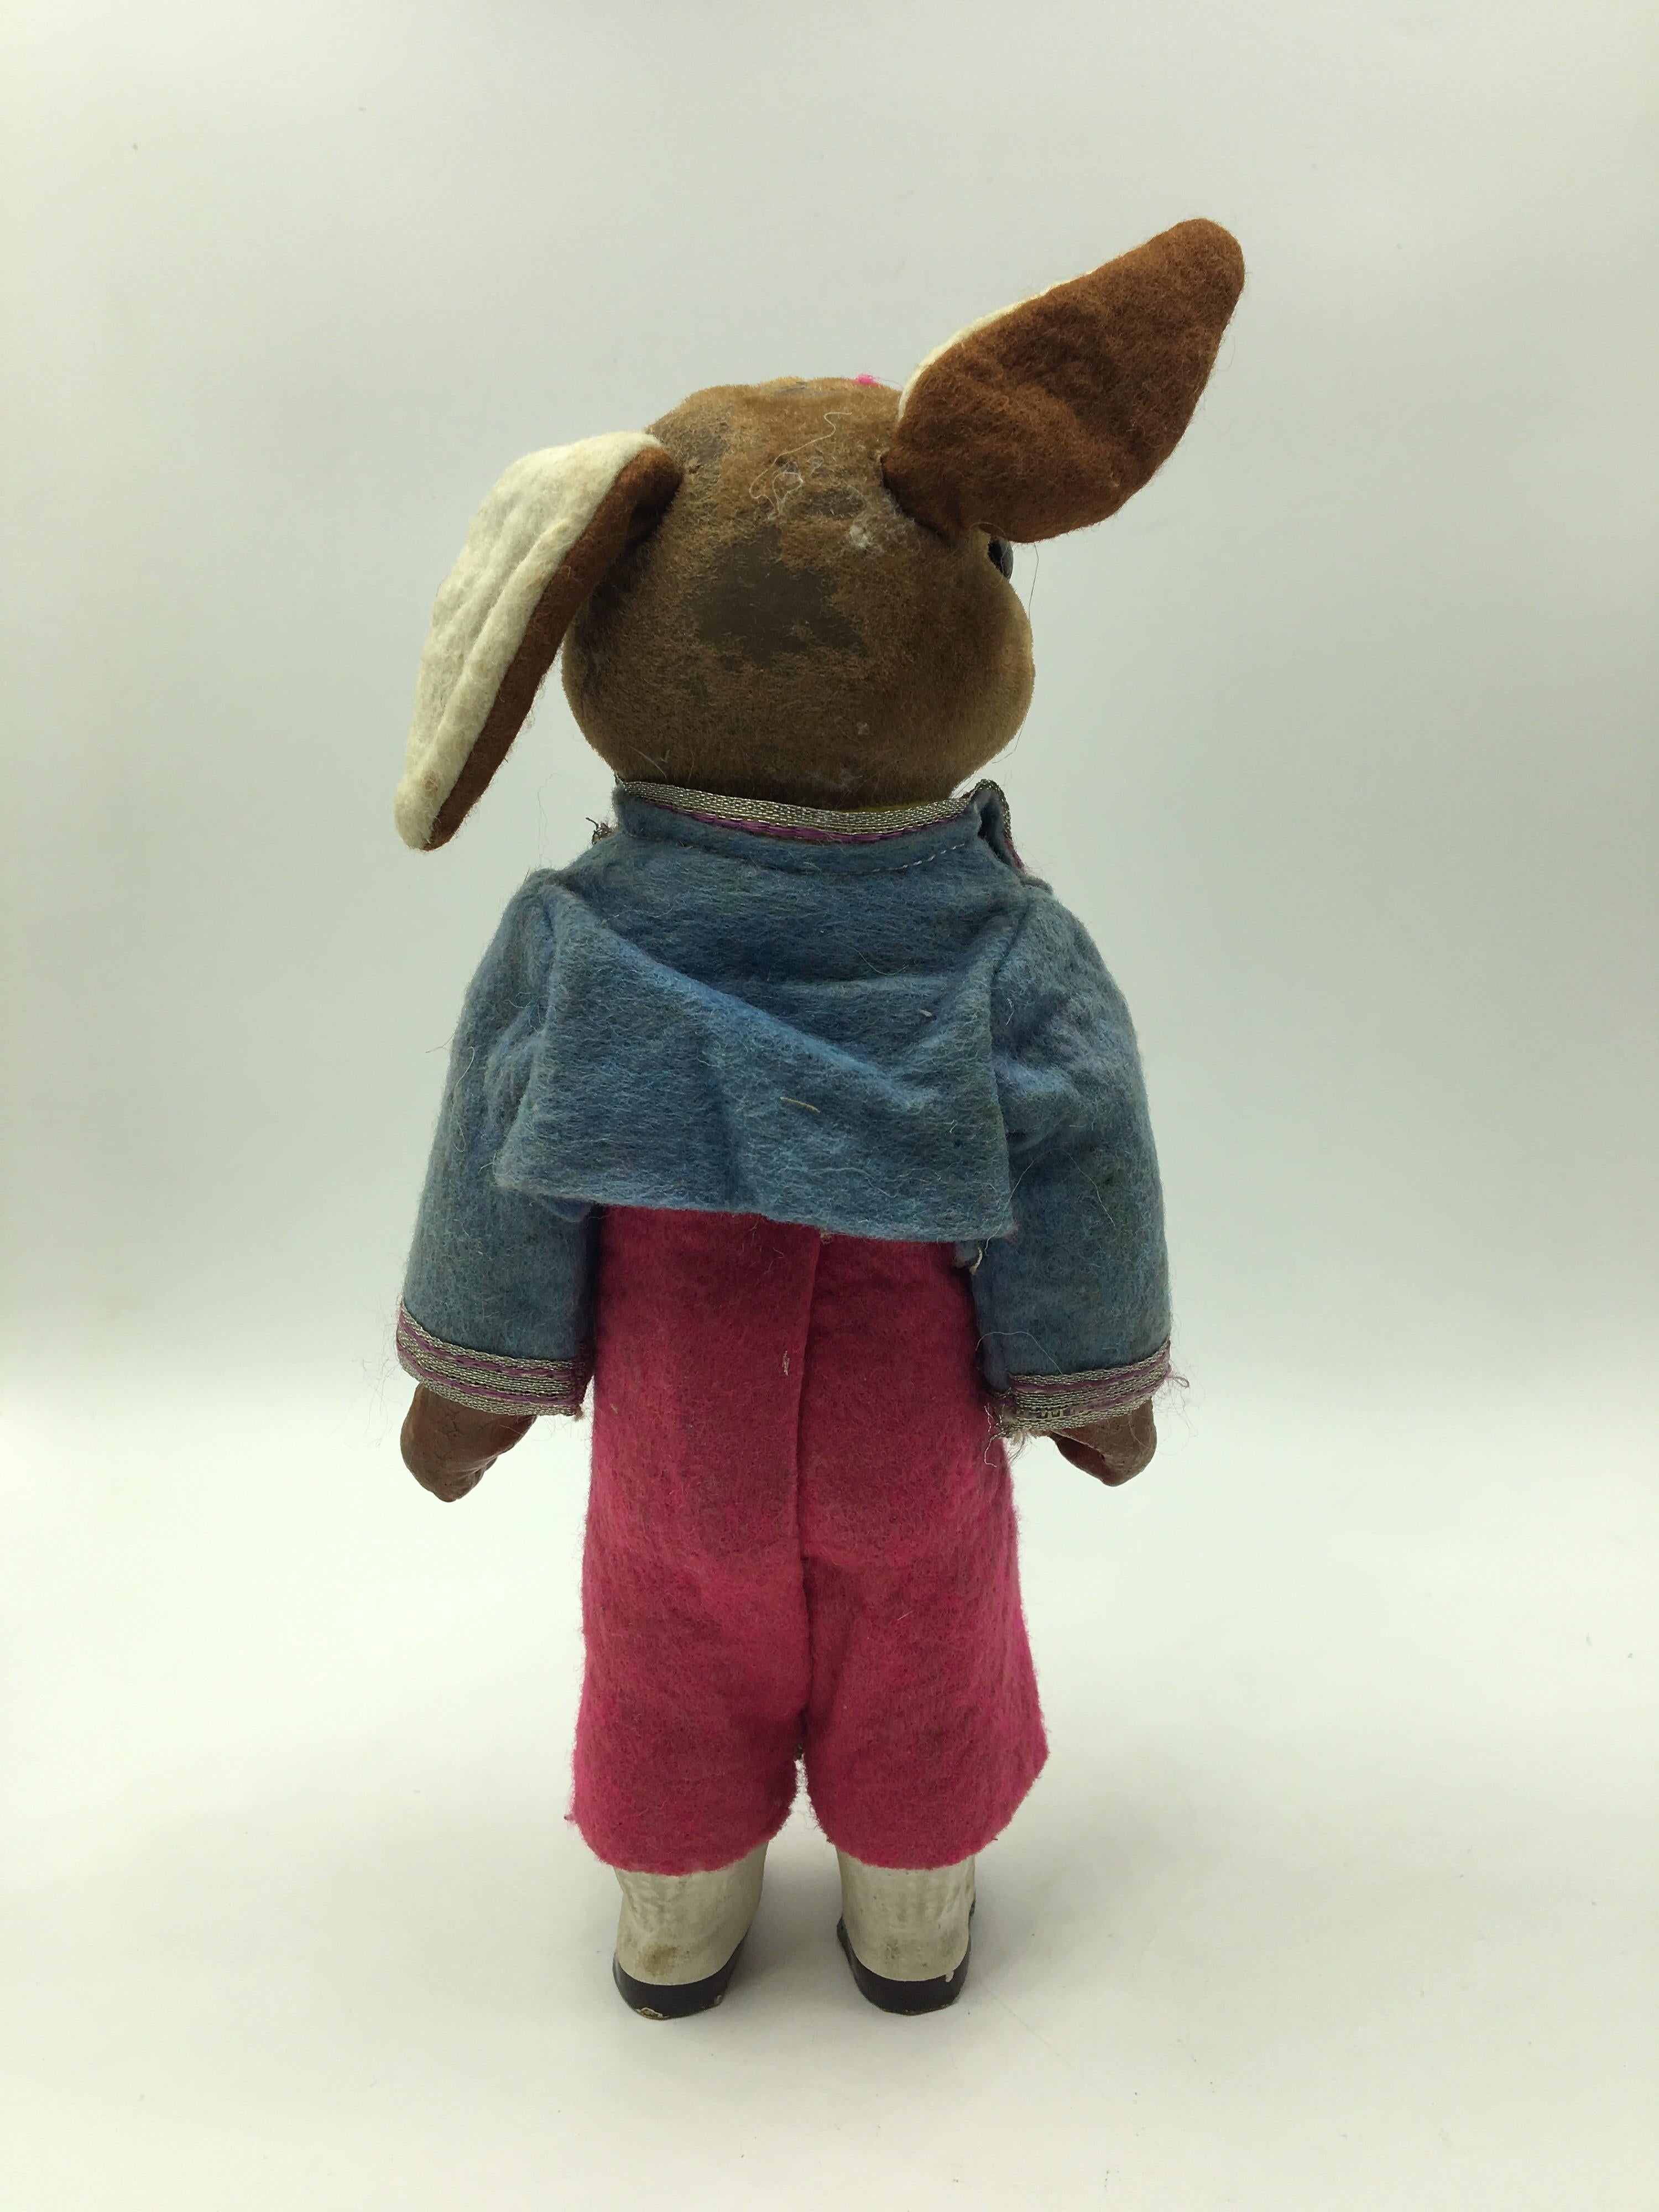 For lovers of antique and vintage toys we offer a rabbit toy made of textile and carton made in US, 1950s.